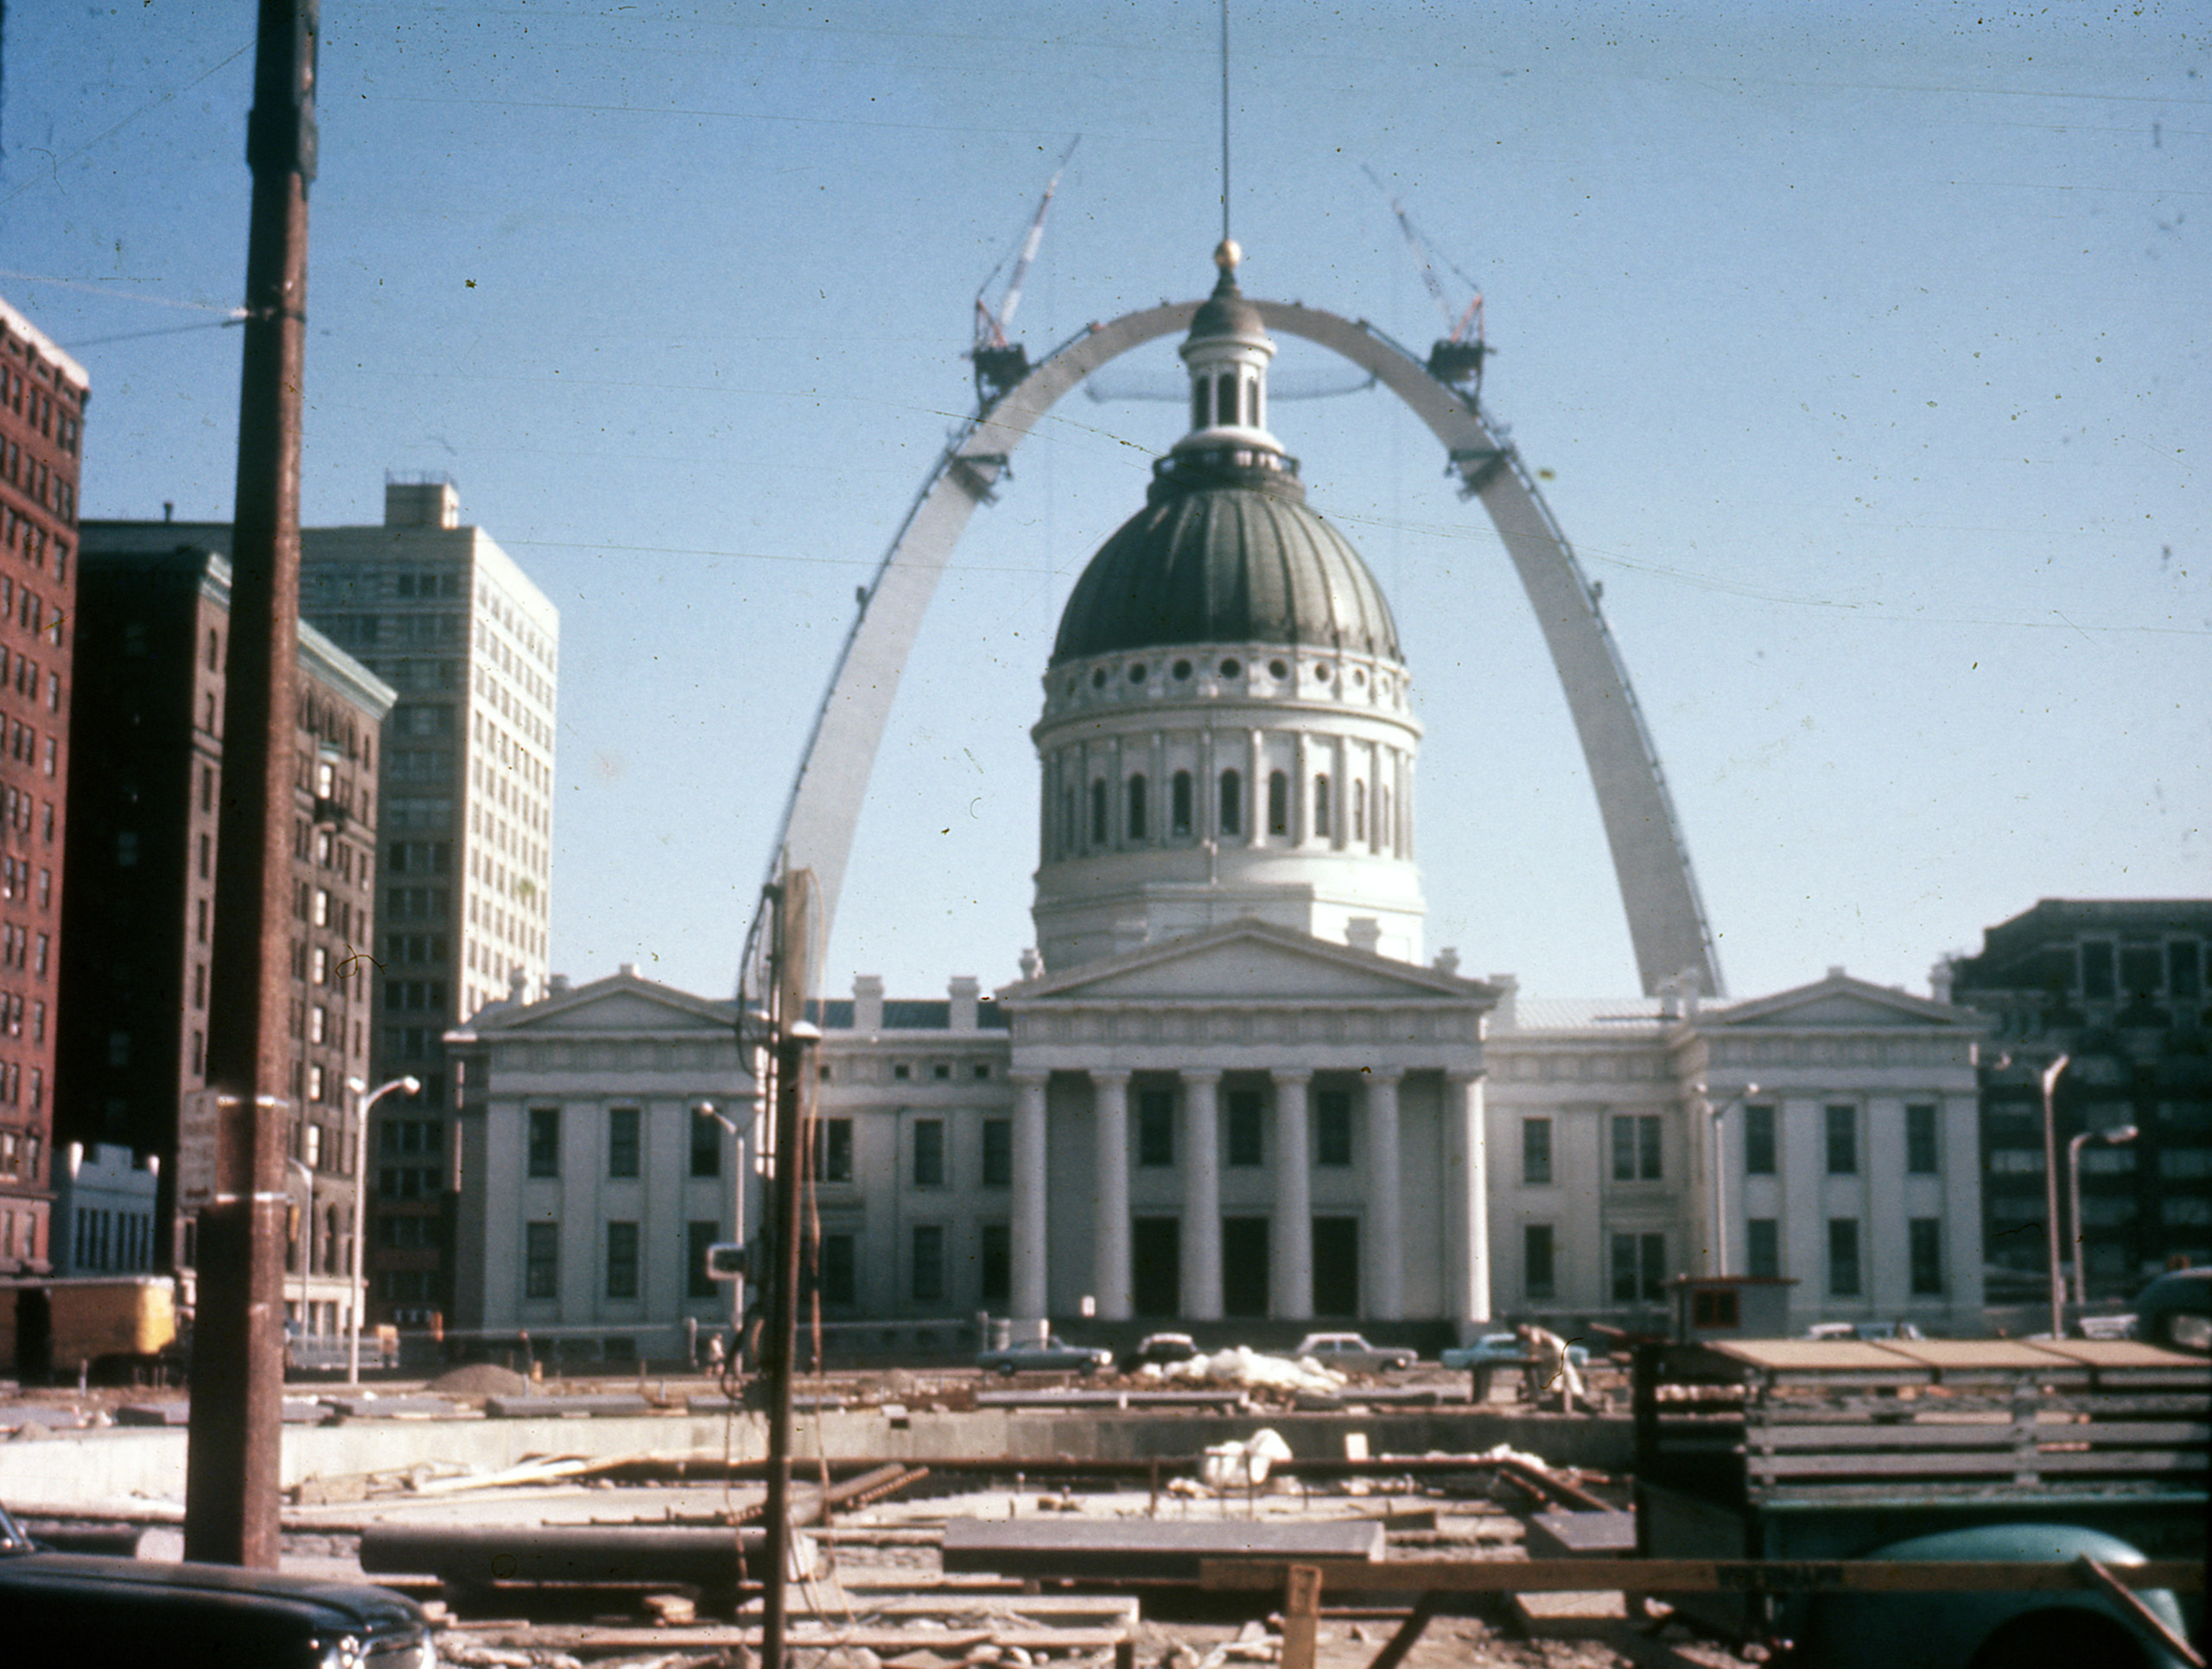 Arch and Old Courthouse with creeper cranes still attached.